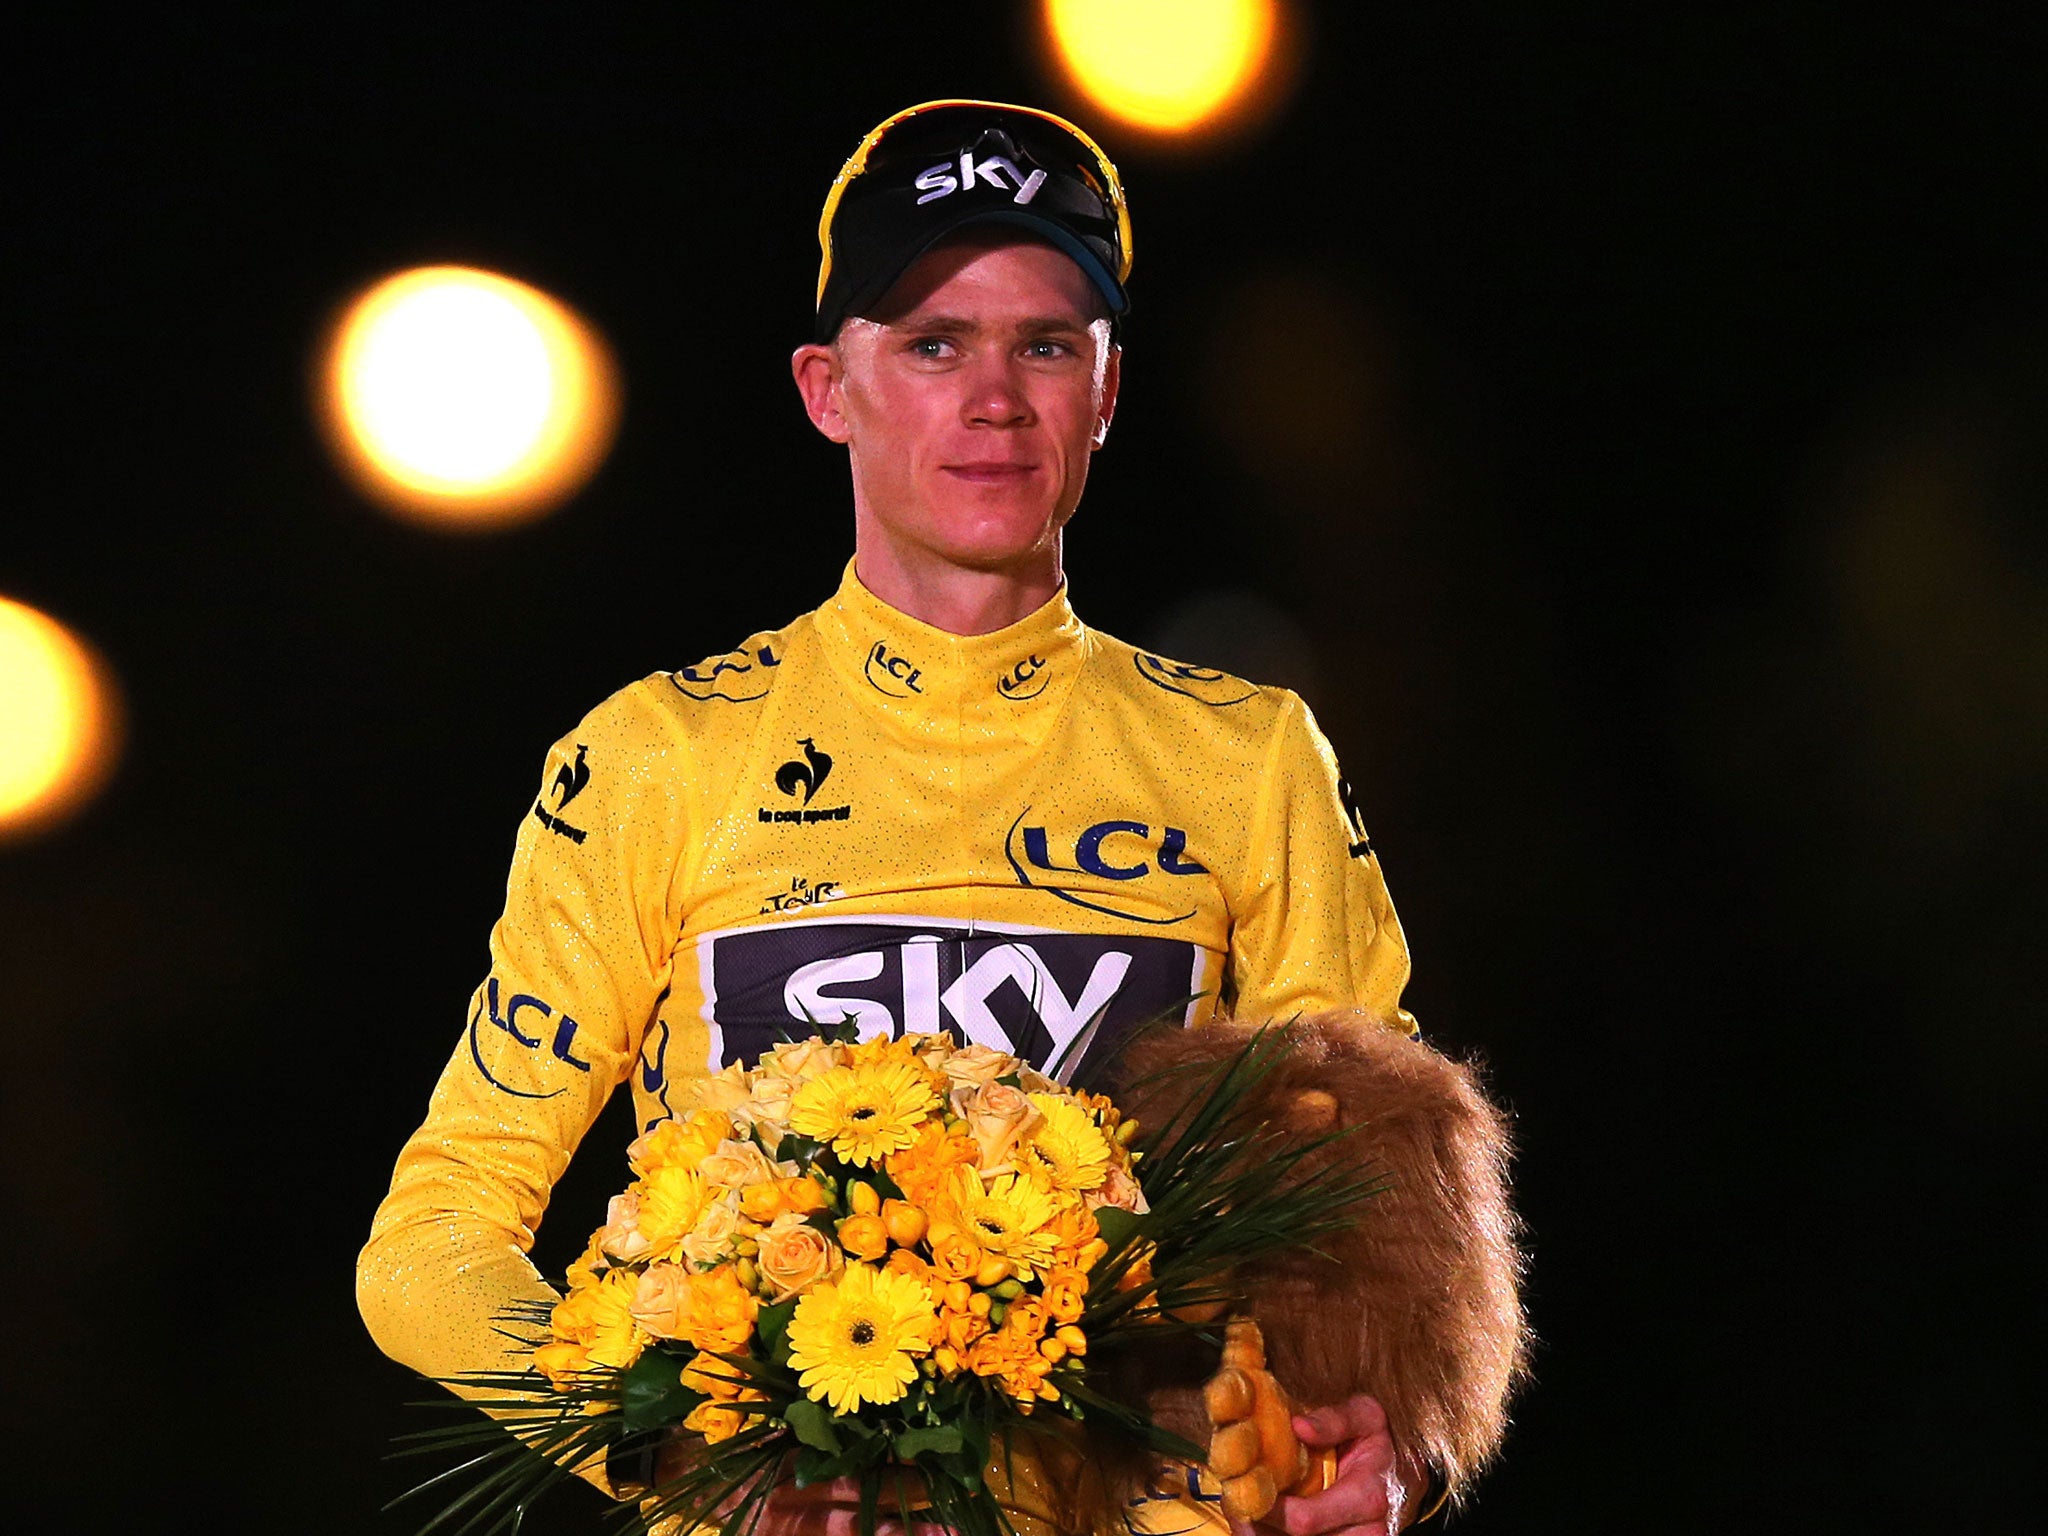 Chris Froome on the podium after the final stage of the Tour de France this summer (Getty)